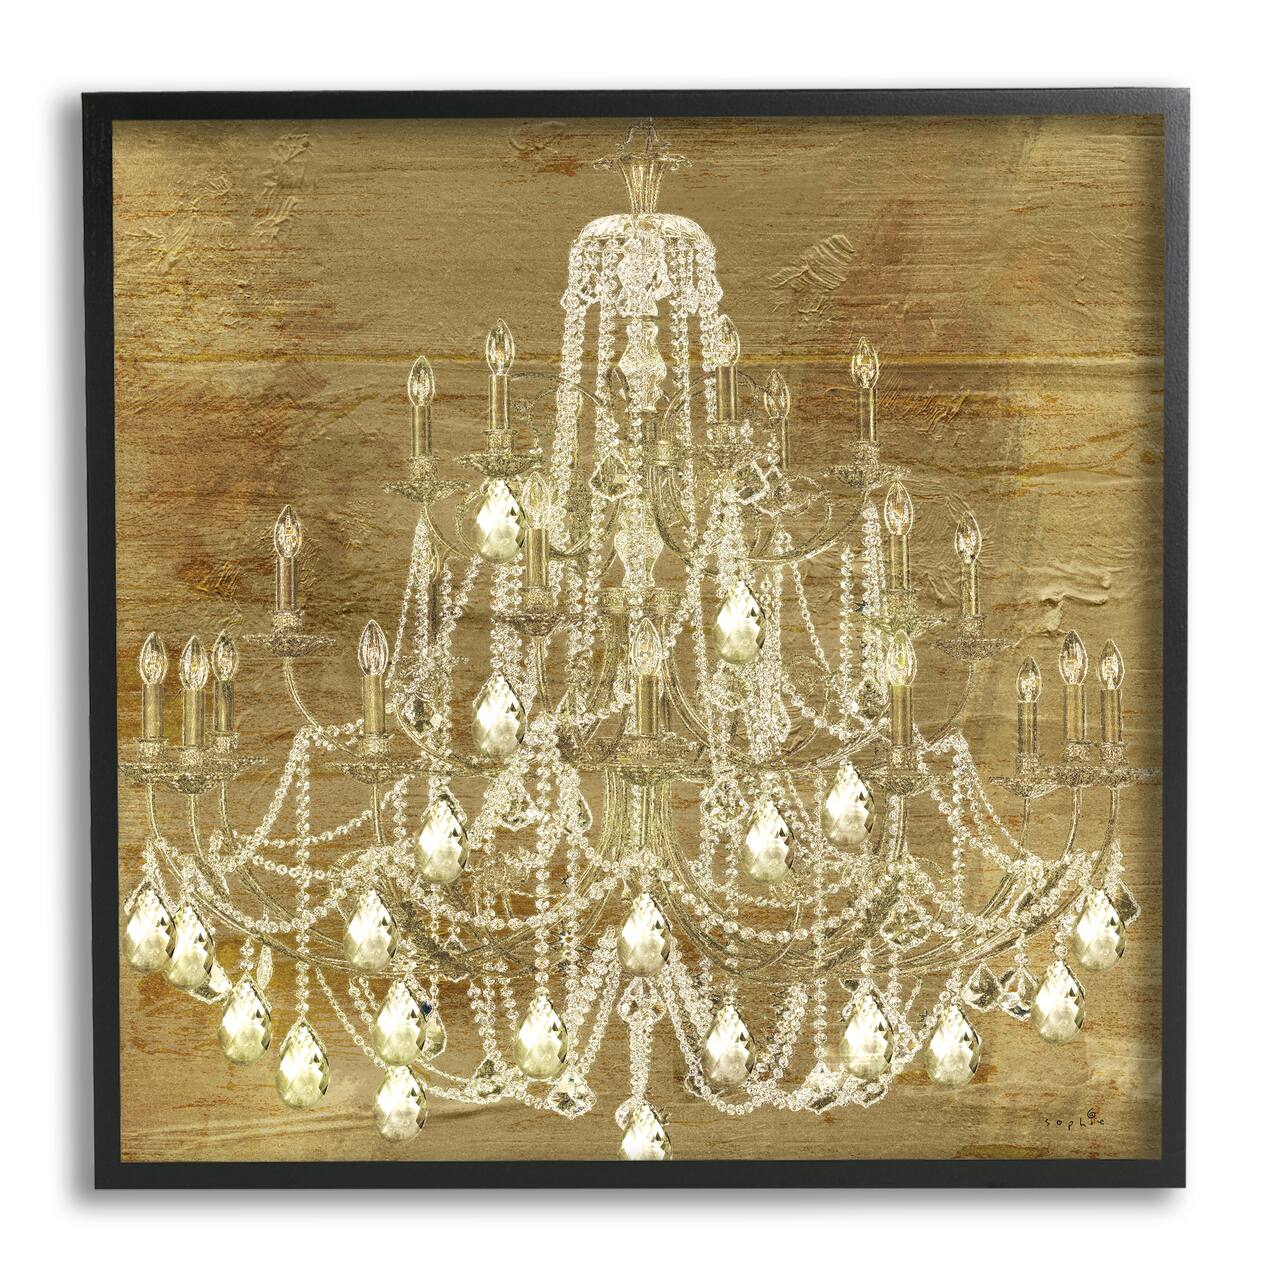 Stupell Industries Vintage Glam Crystal Chandelier Rustic Distressed Gold Background Framed Wall Art